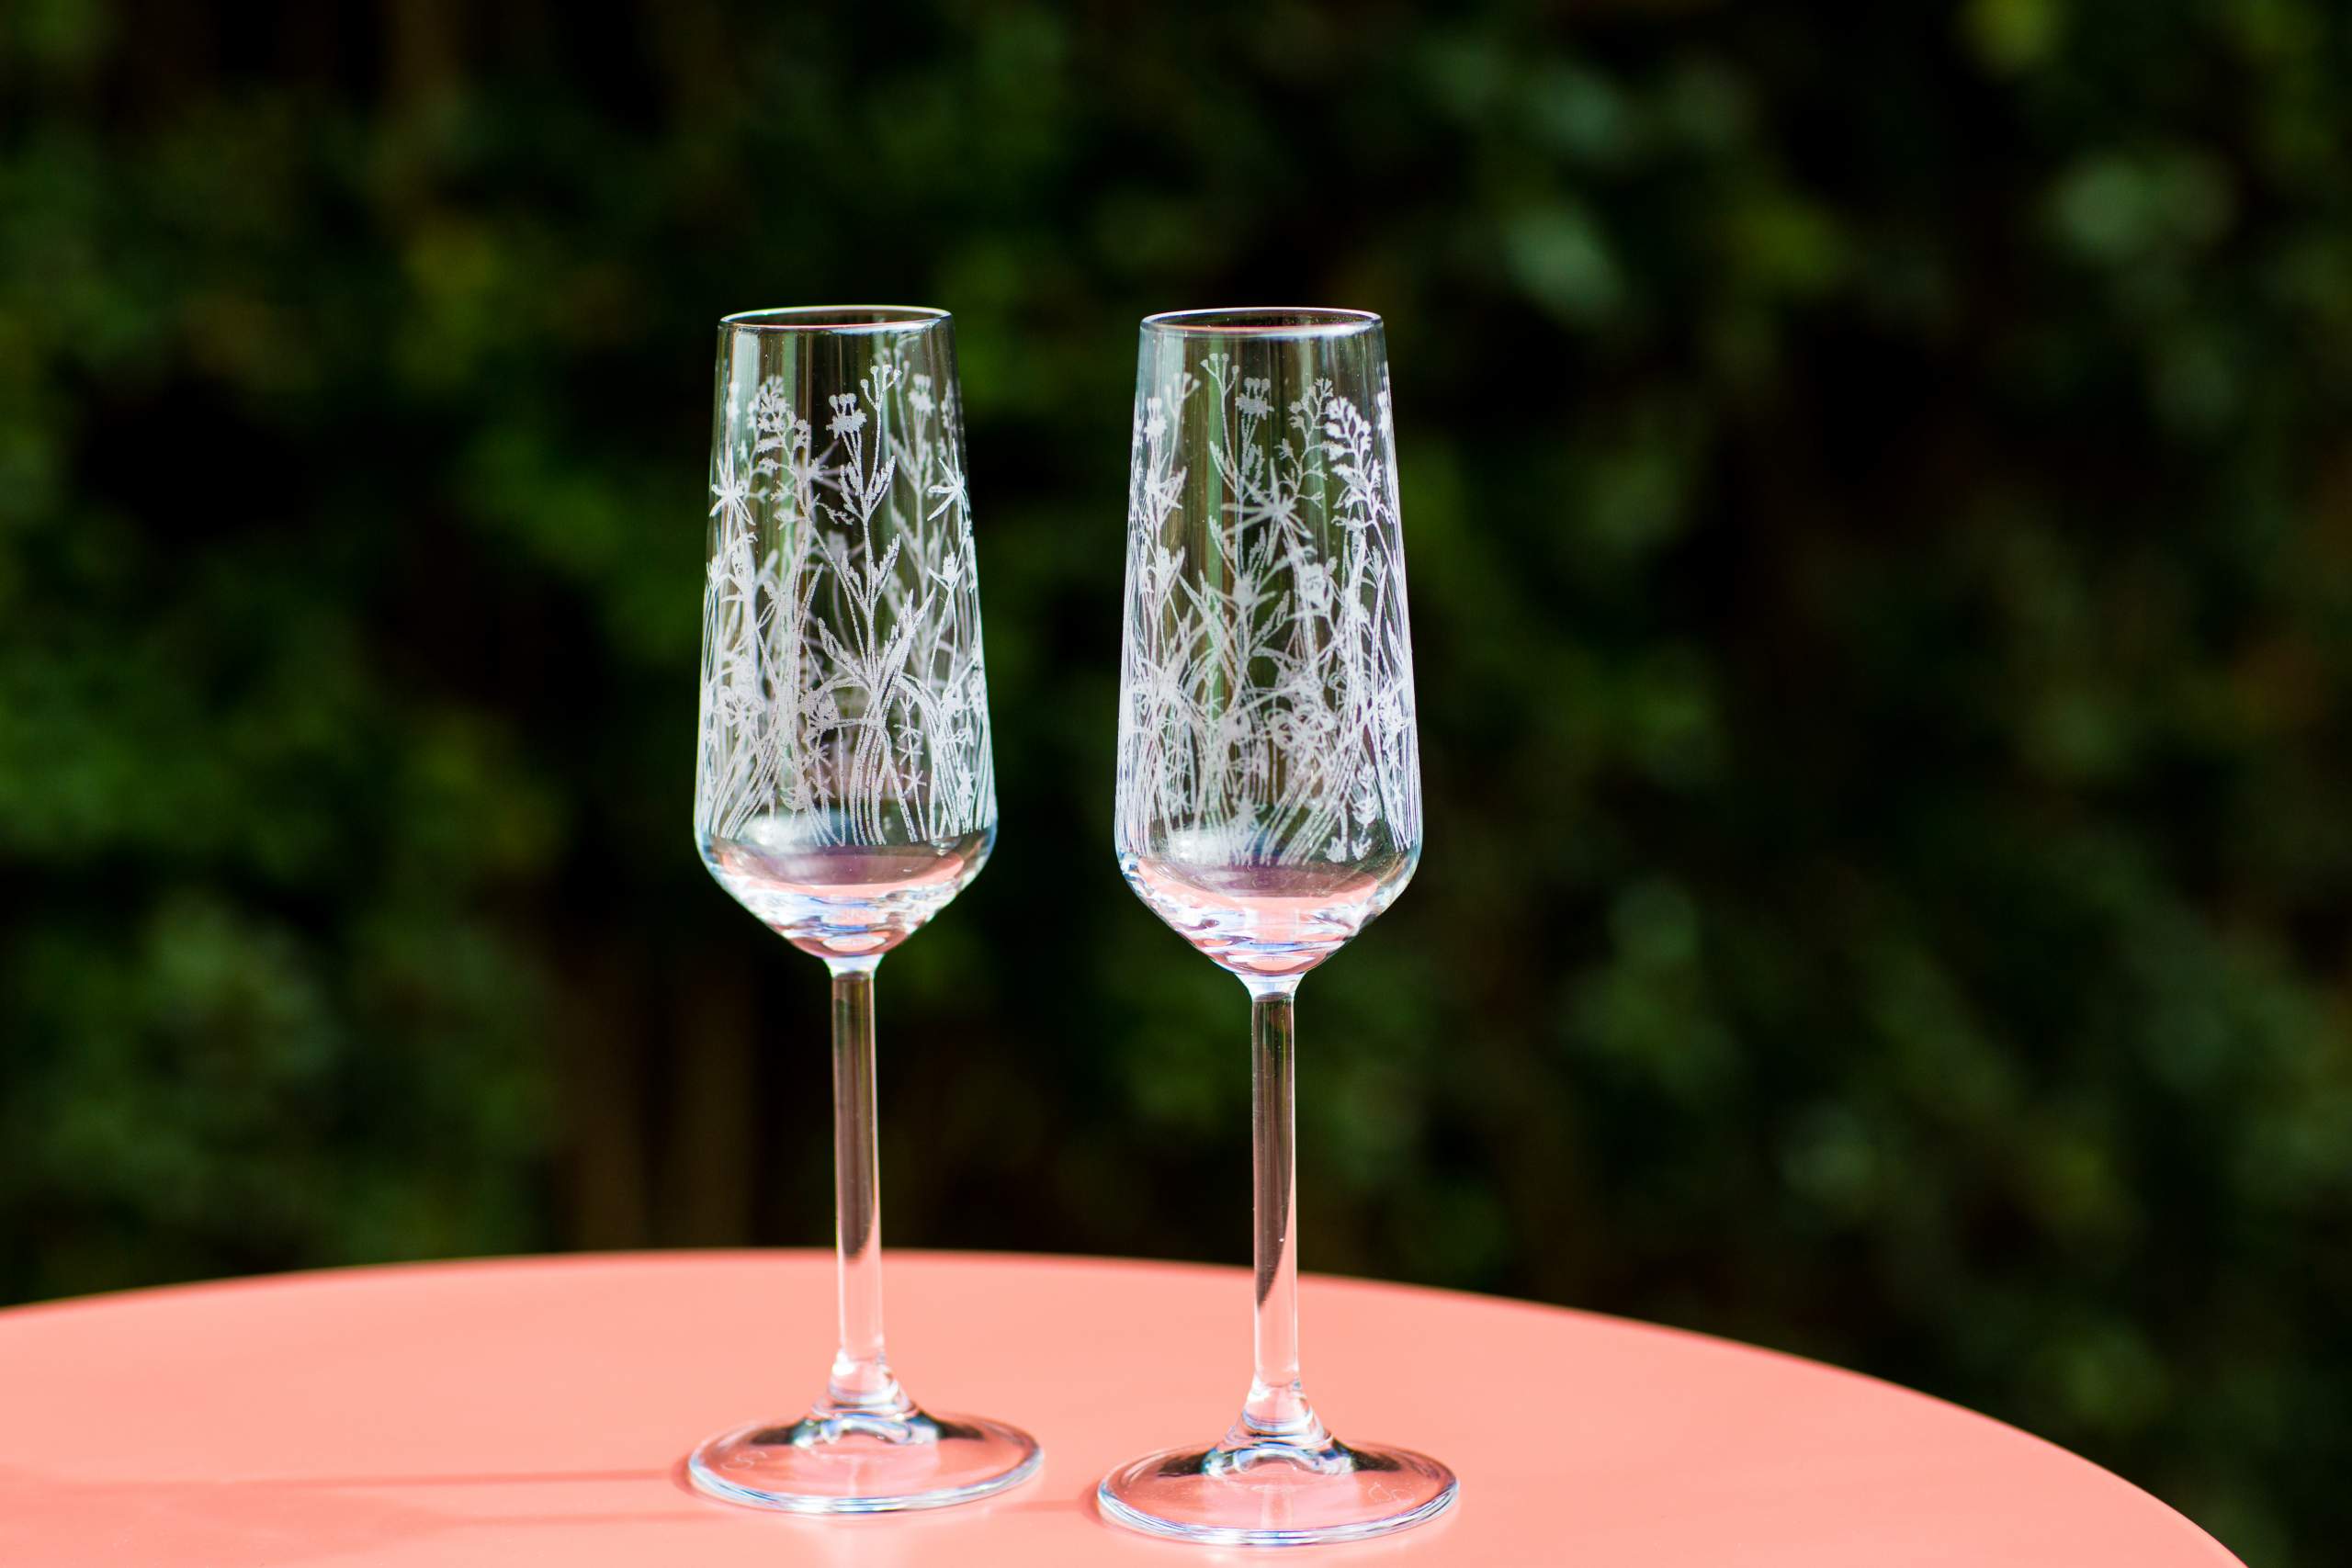 Emma-Britton-Meadow-Patterned-Champagne-Glasses